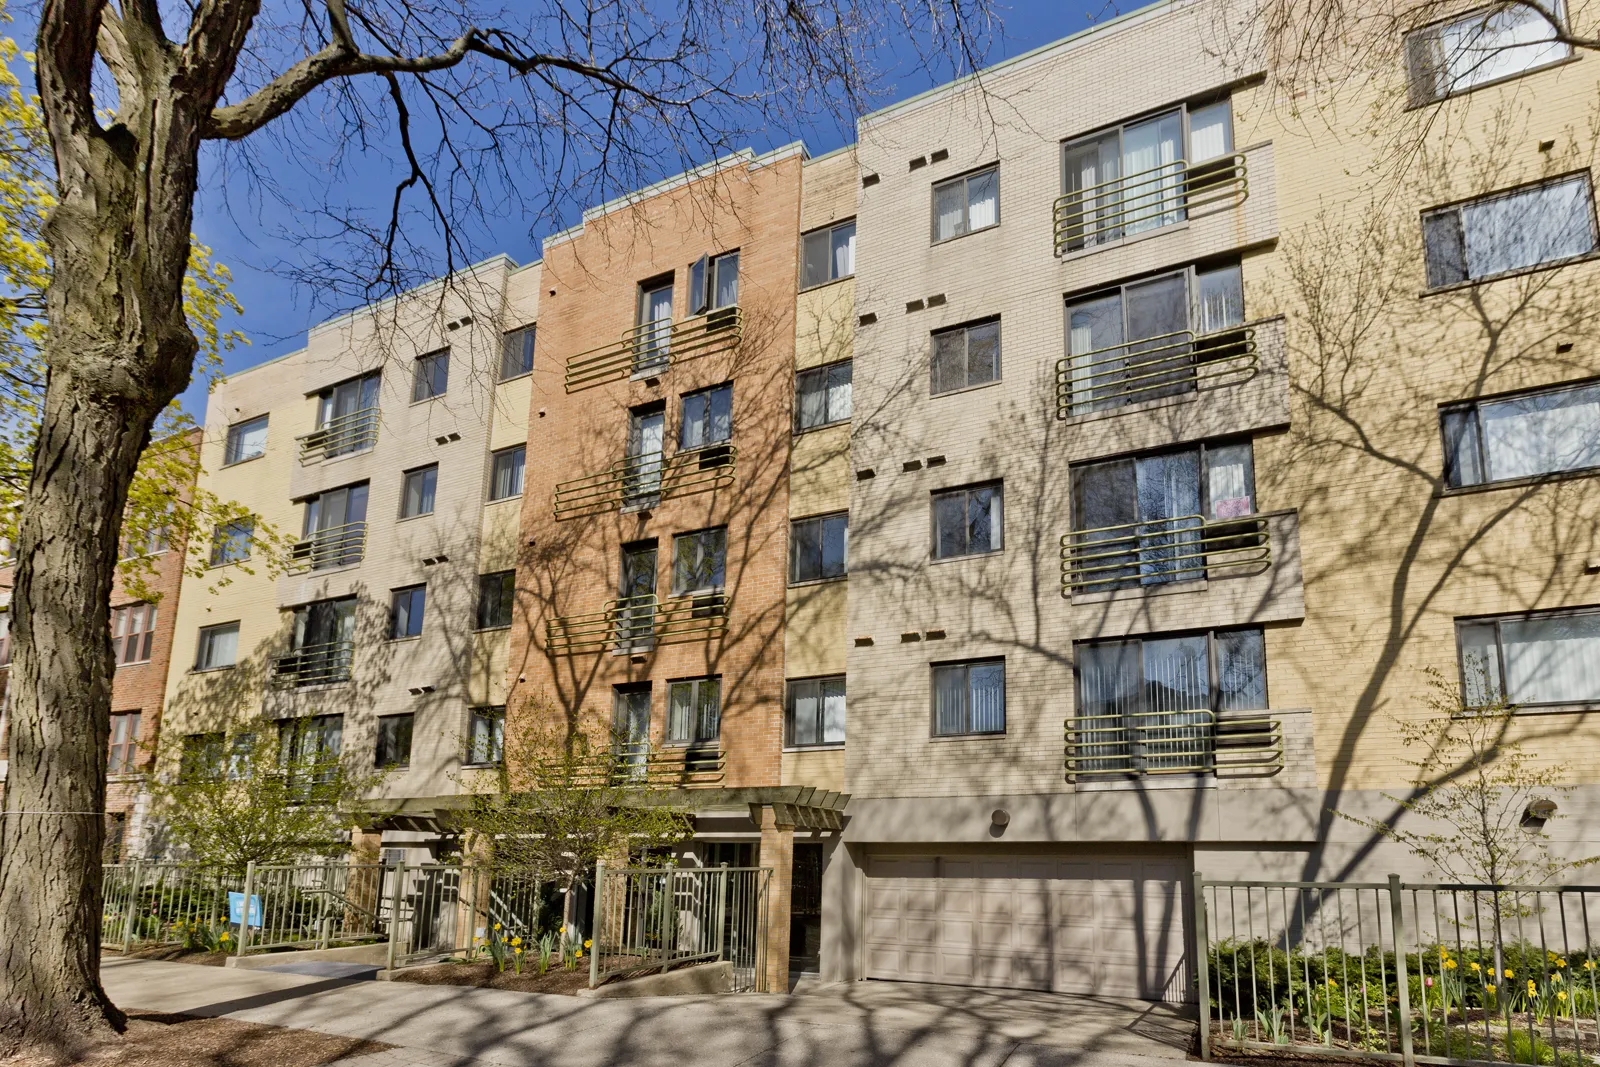 5423 N. Winthrop Ave 60640-Winthrop Station Apartments-unit#411-Chicago-IL